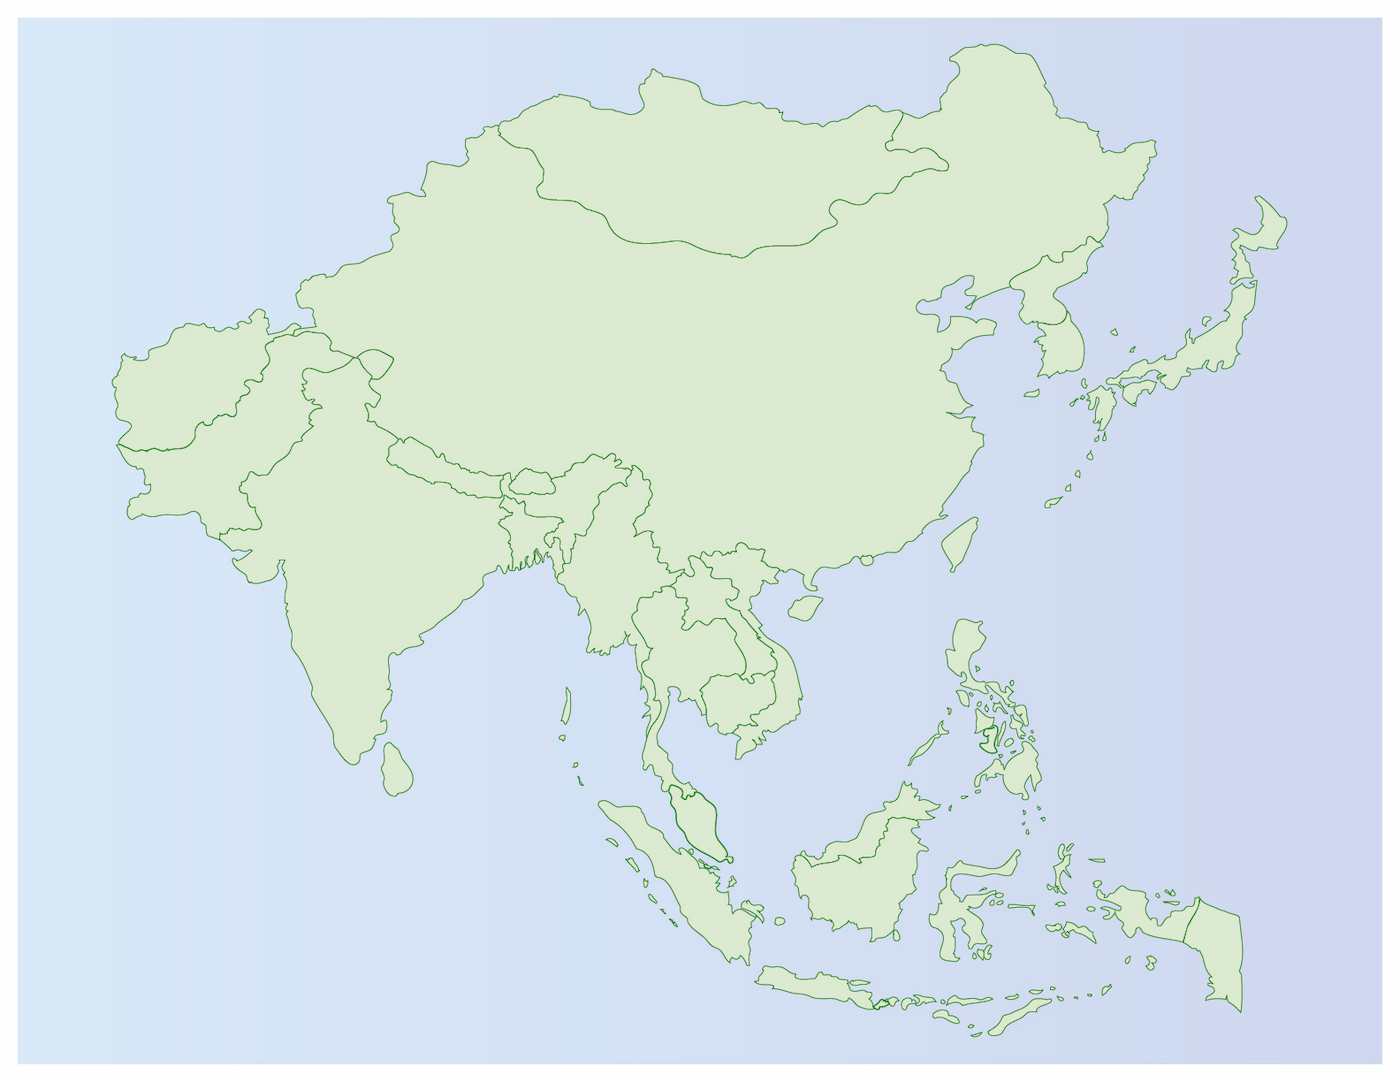 Map of the APAC region